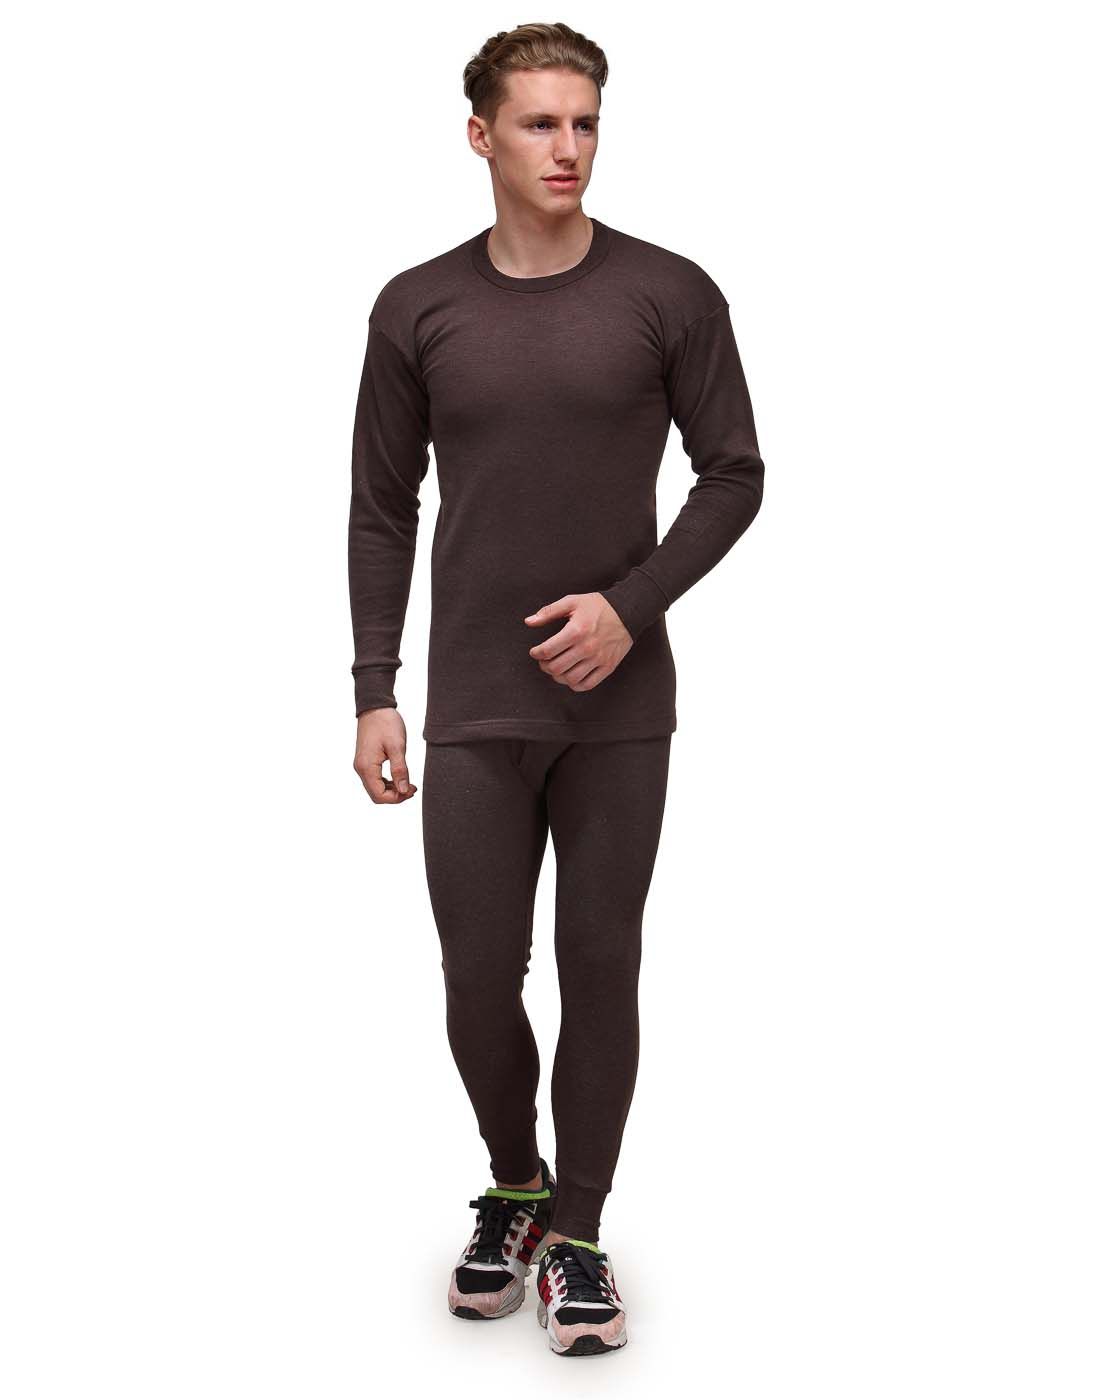 thermal wear lower - OFF-60% >Free Delivery